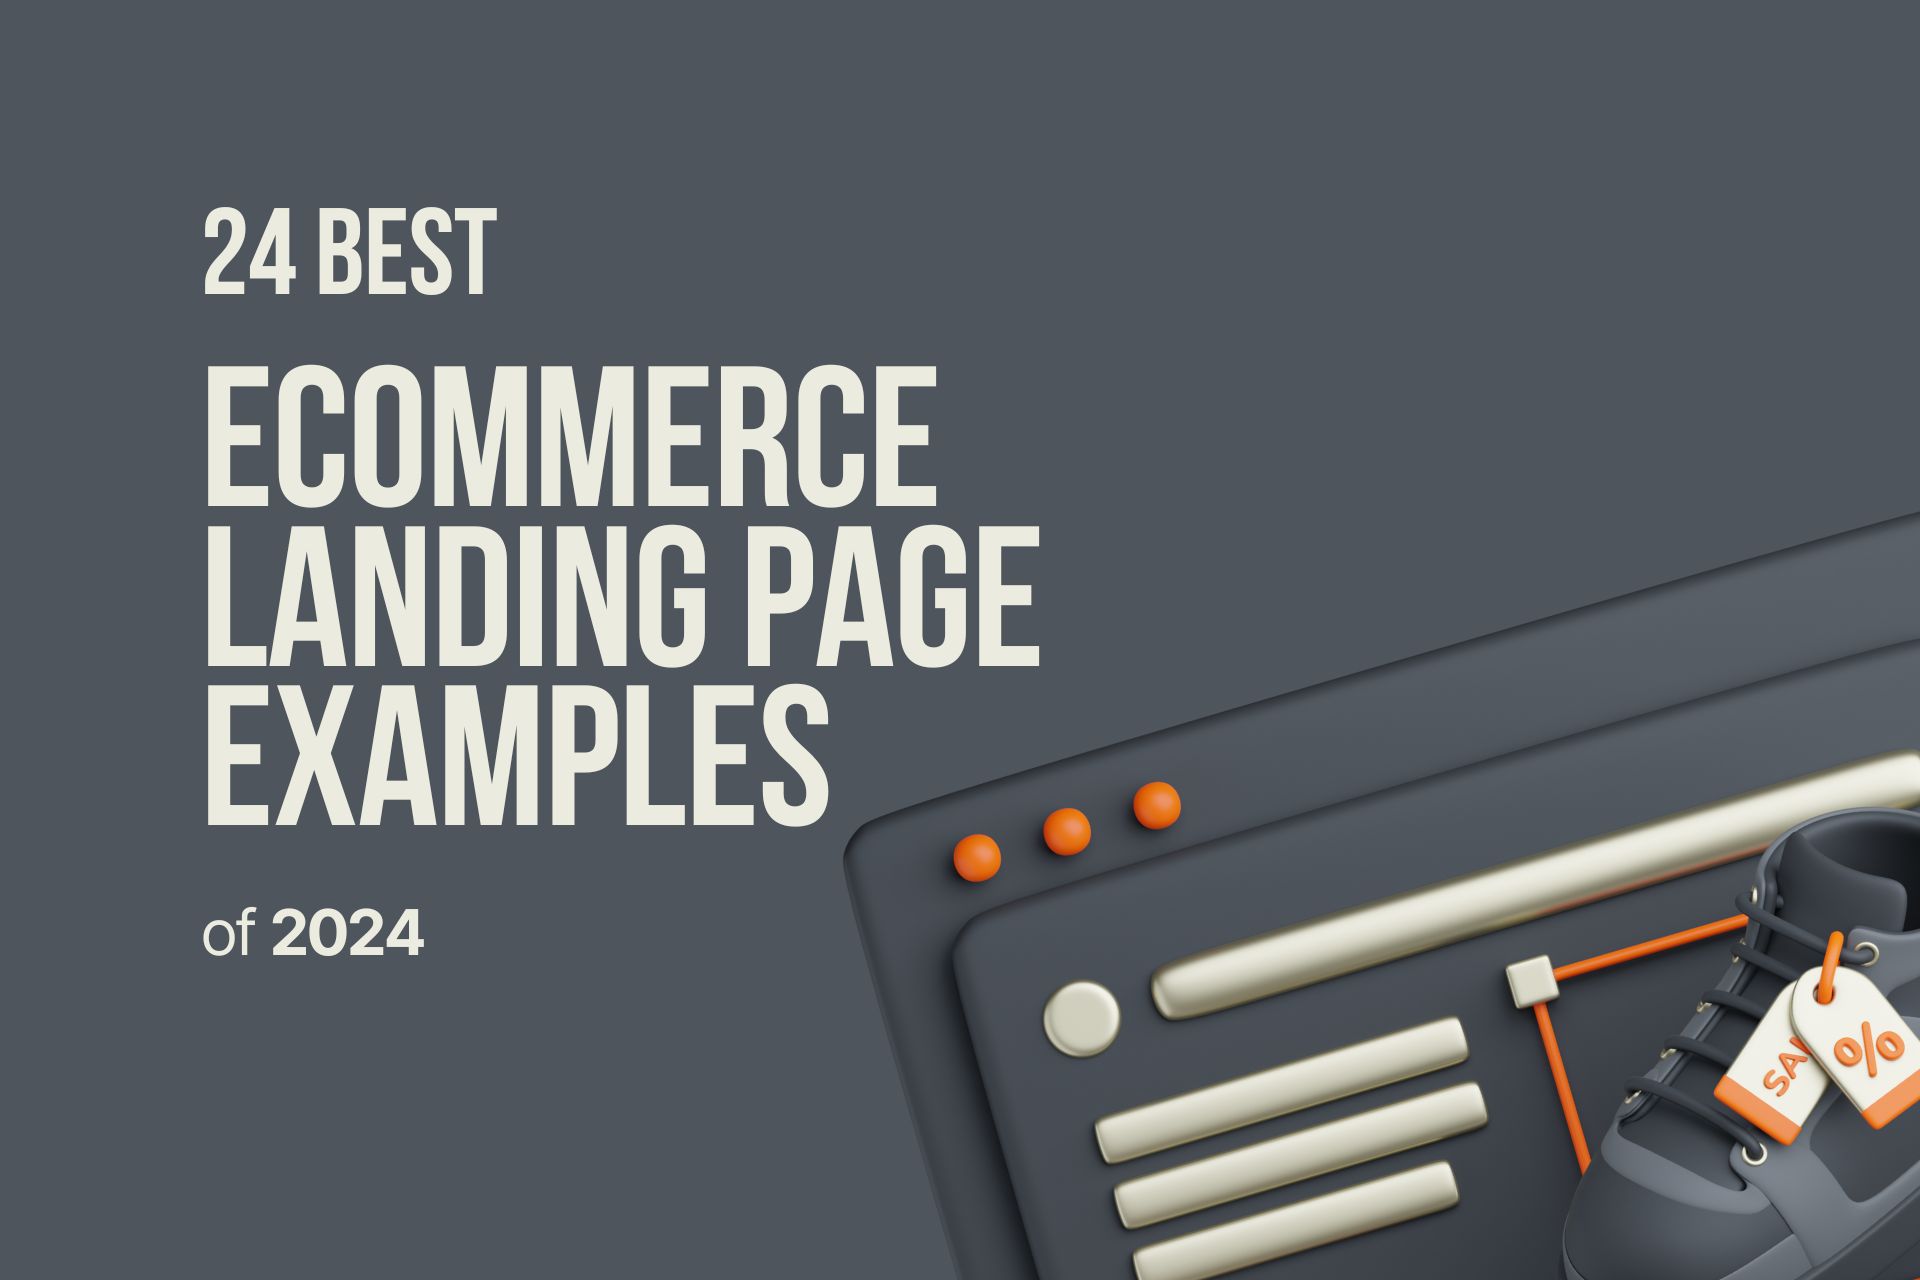 24 Best Ecommerce Landing Page Examples of 2024